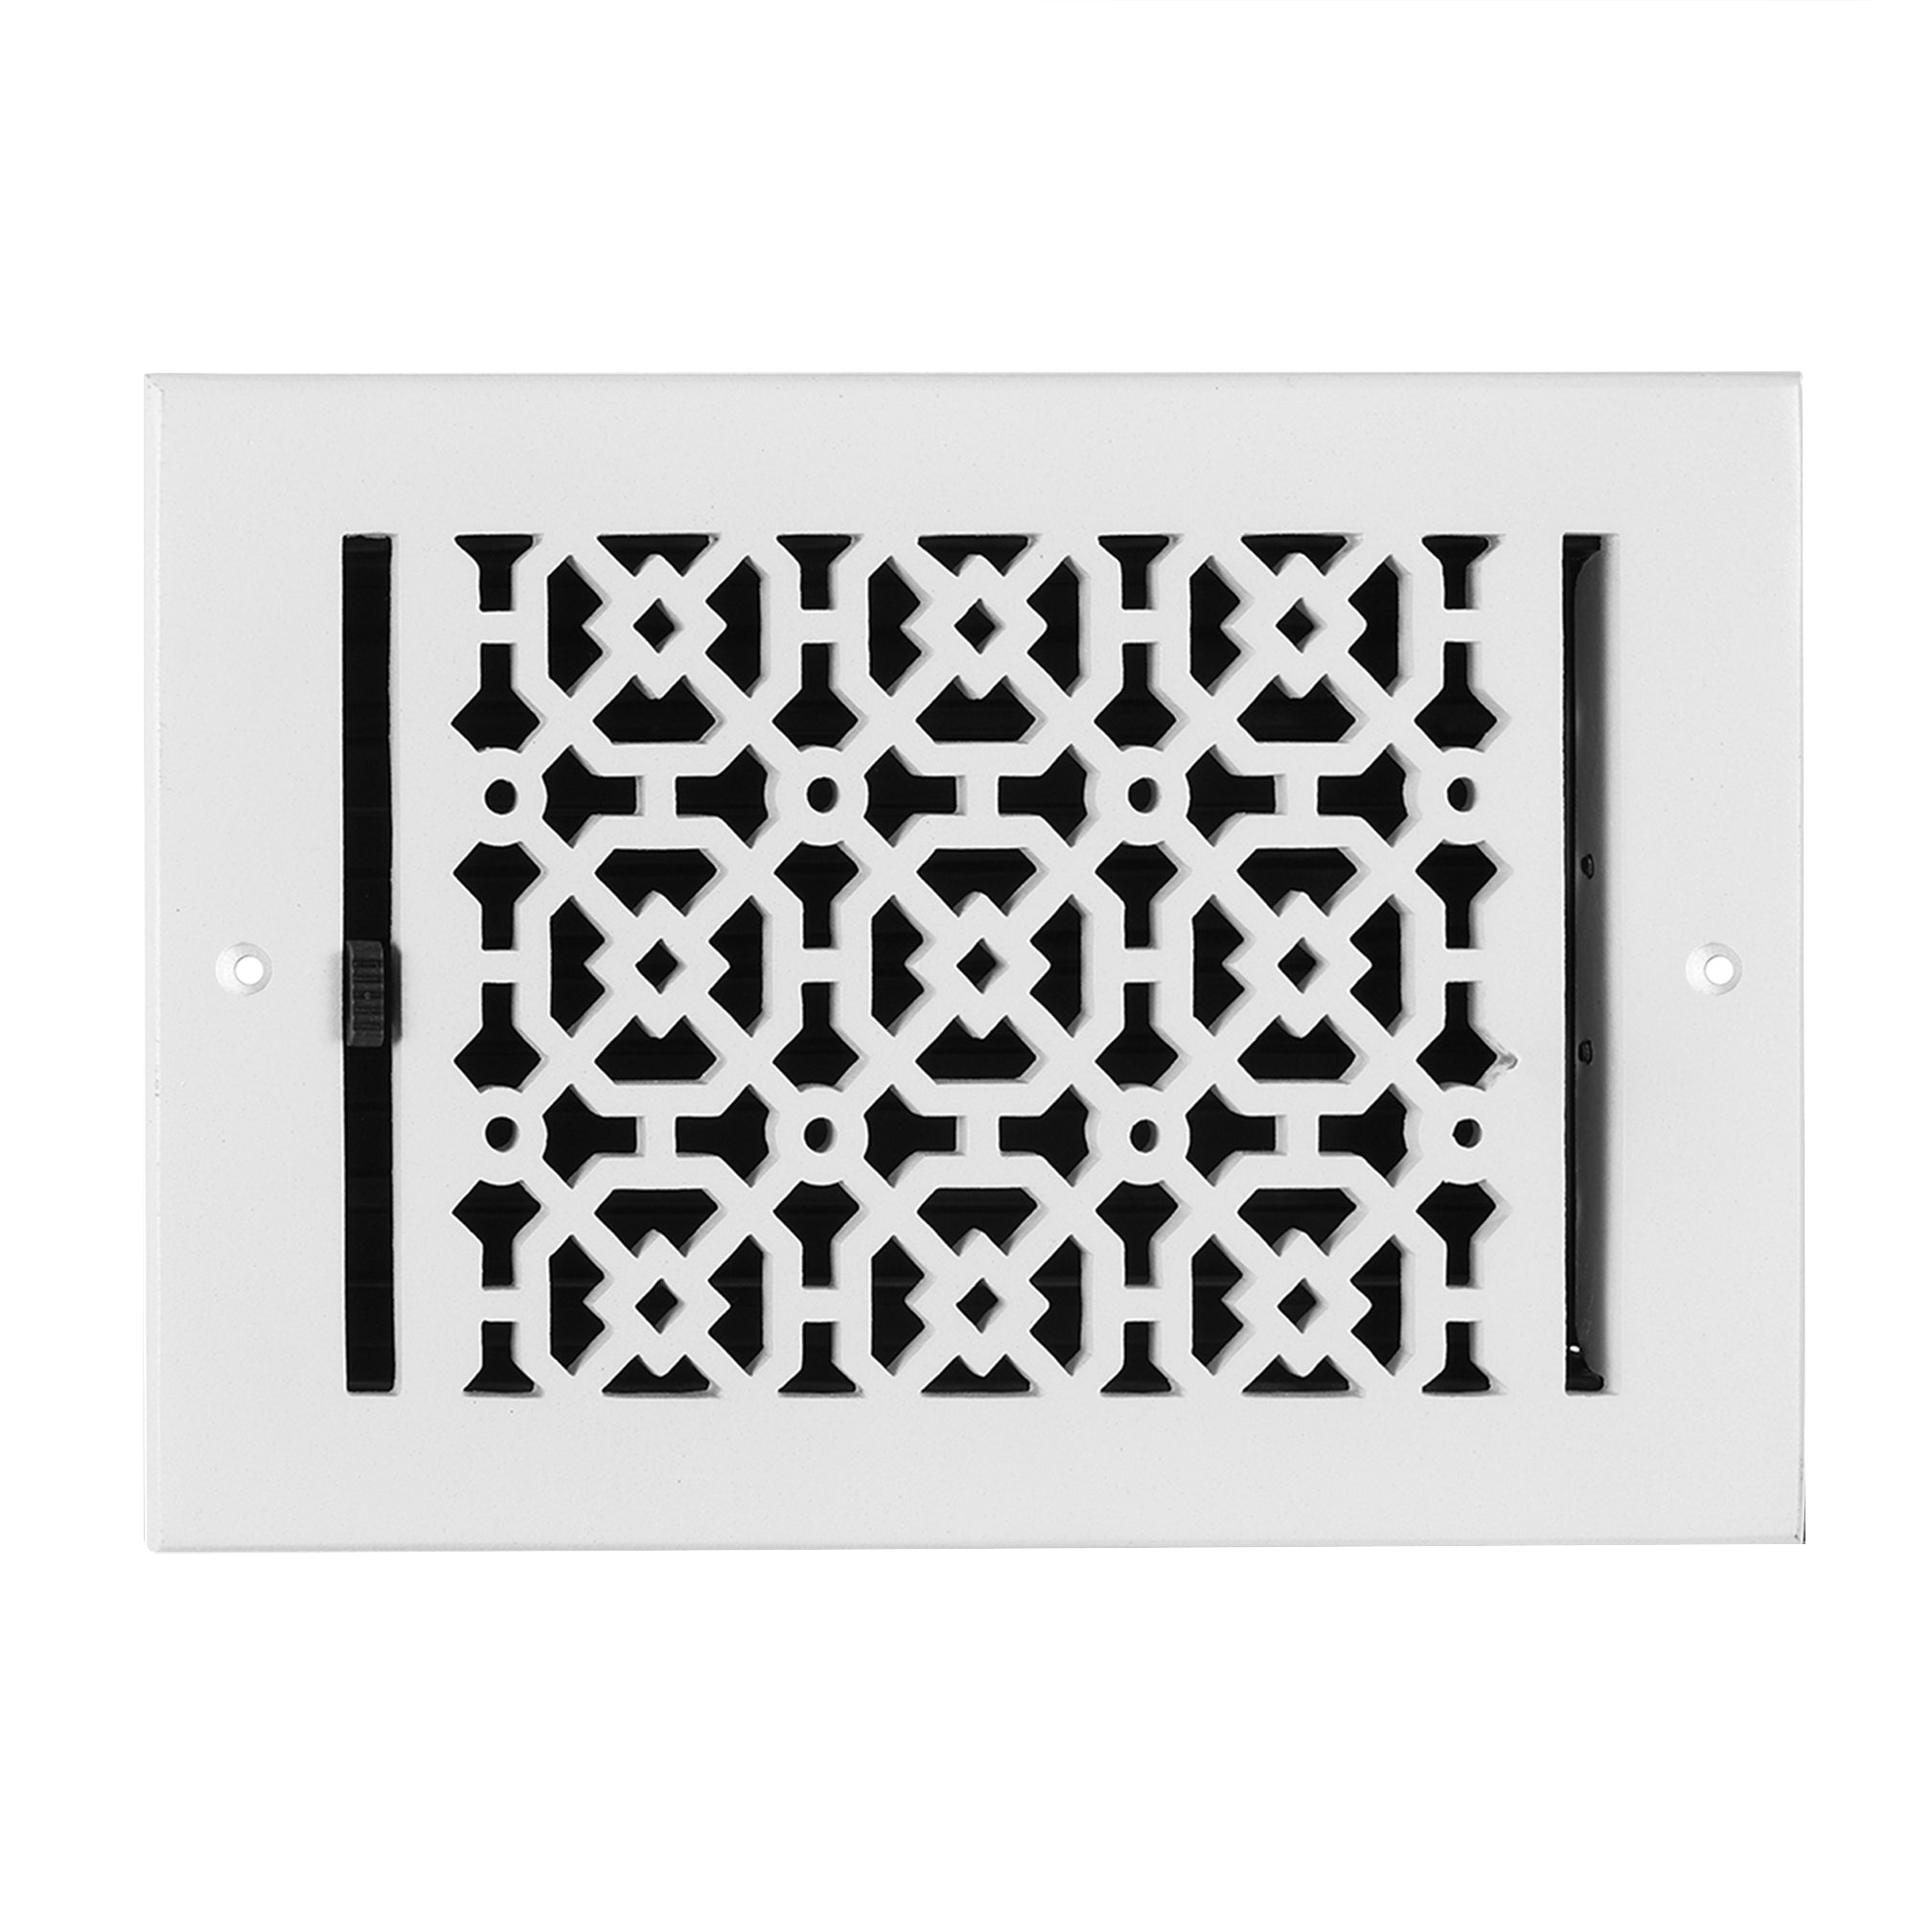 Achtek Air Supply Vent 5"x 9" Duct Opening (Overall 6-1/2"x 10-3/4") Solid Cast Aluminium Register Cover | Powder Coated